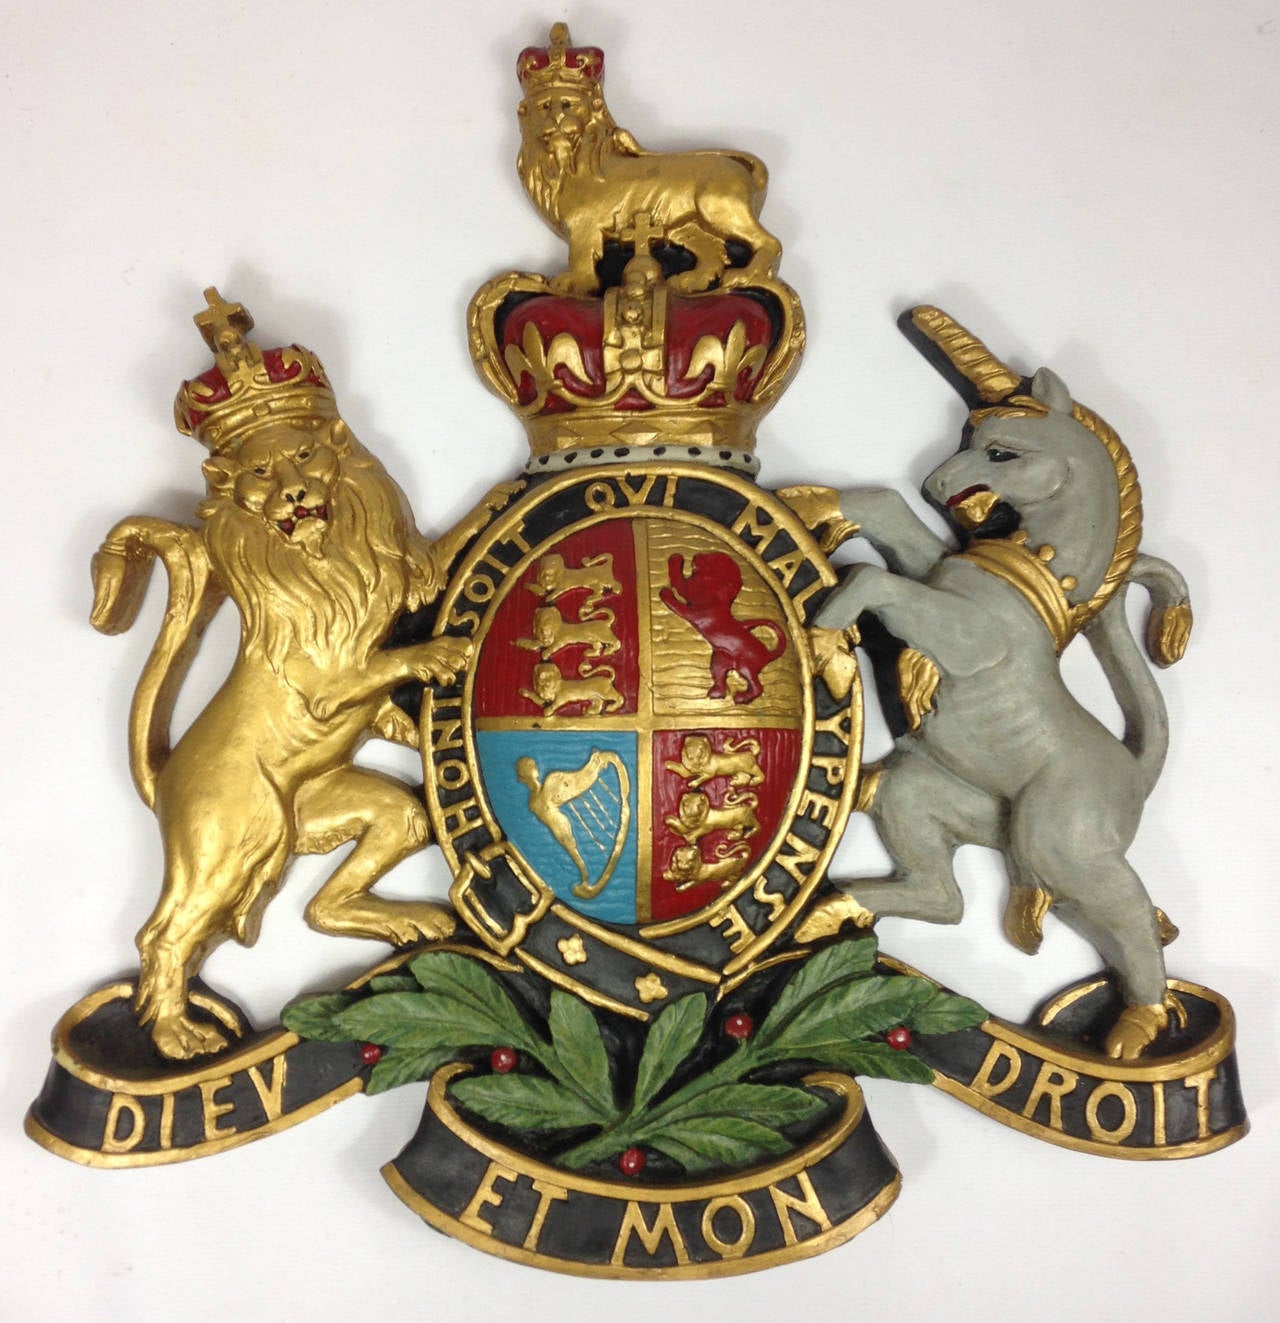 A large and imposing Queen Elizabeth II era Royal coat of arms.

Constructed of hand painted fibreglass in the traditional form with lion and unicorn either side of the union standard, all surmounted by the Queen's crown. Including the Latin